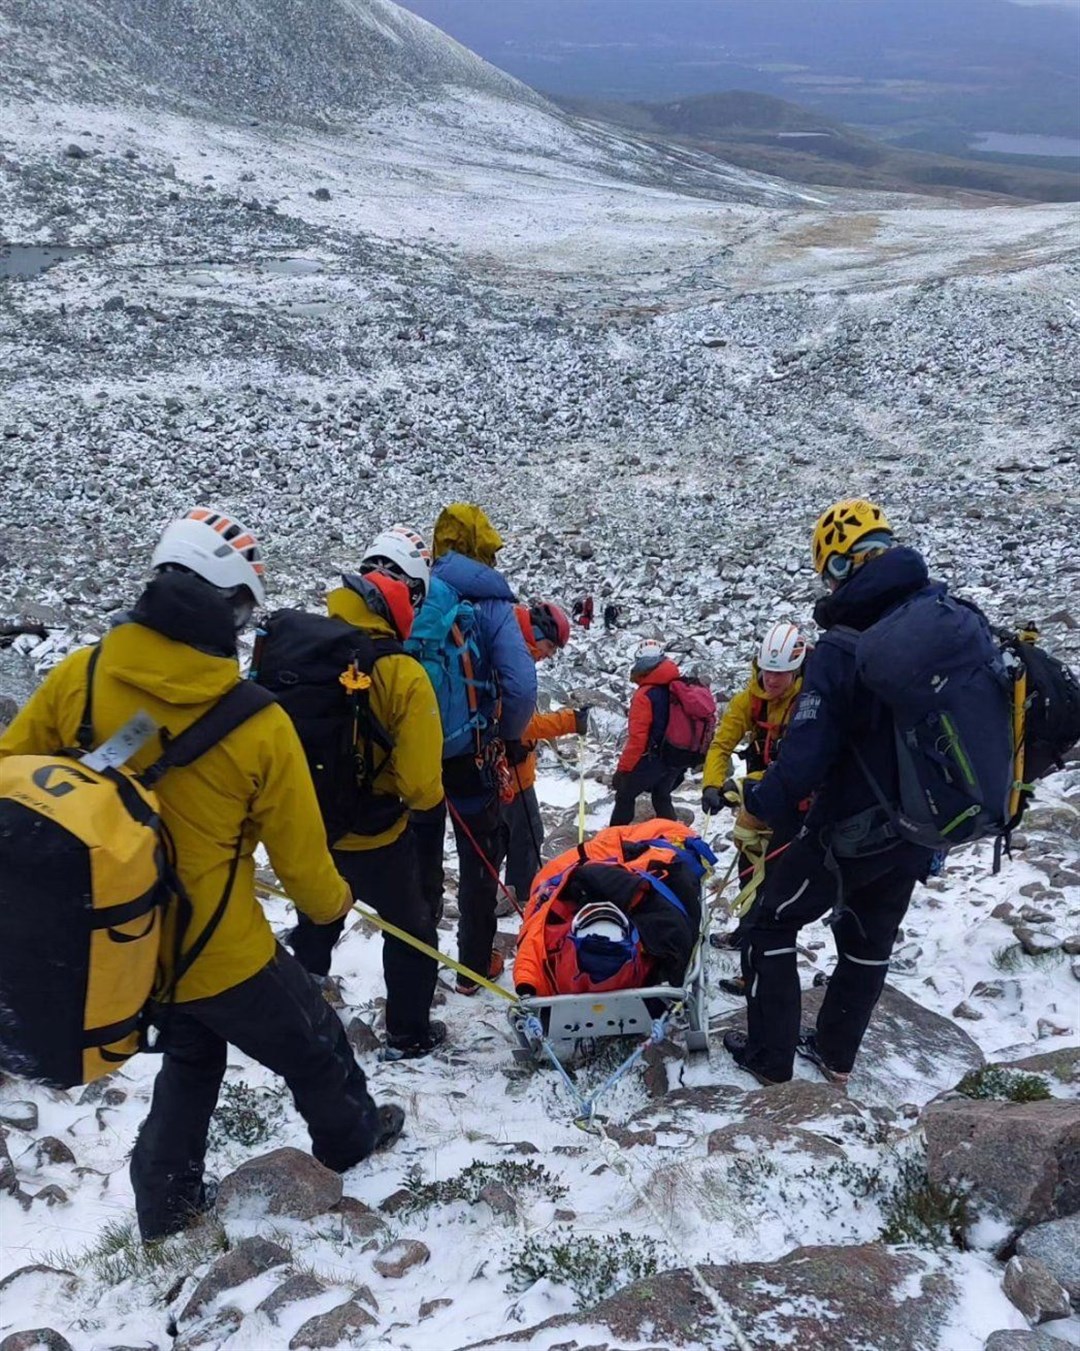 Members of the Cairngorm Mountain Rescue Team attend the injured climber.